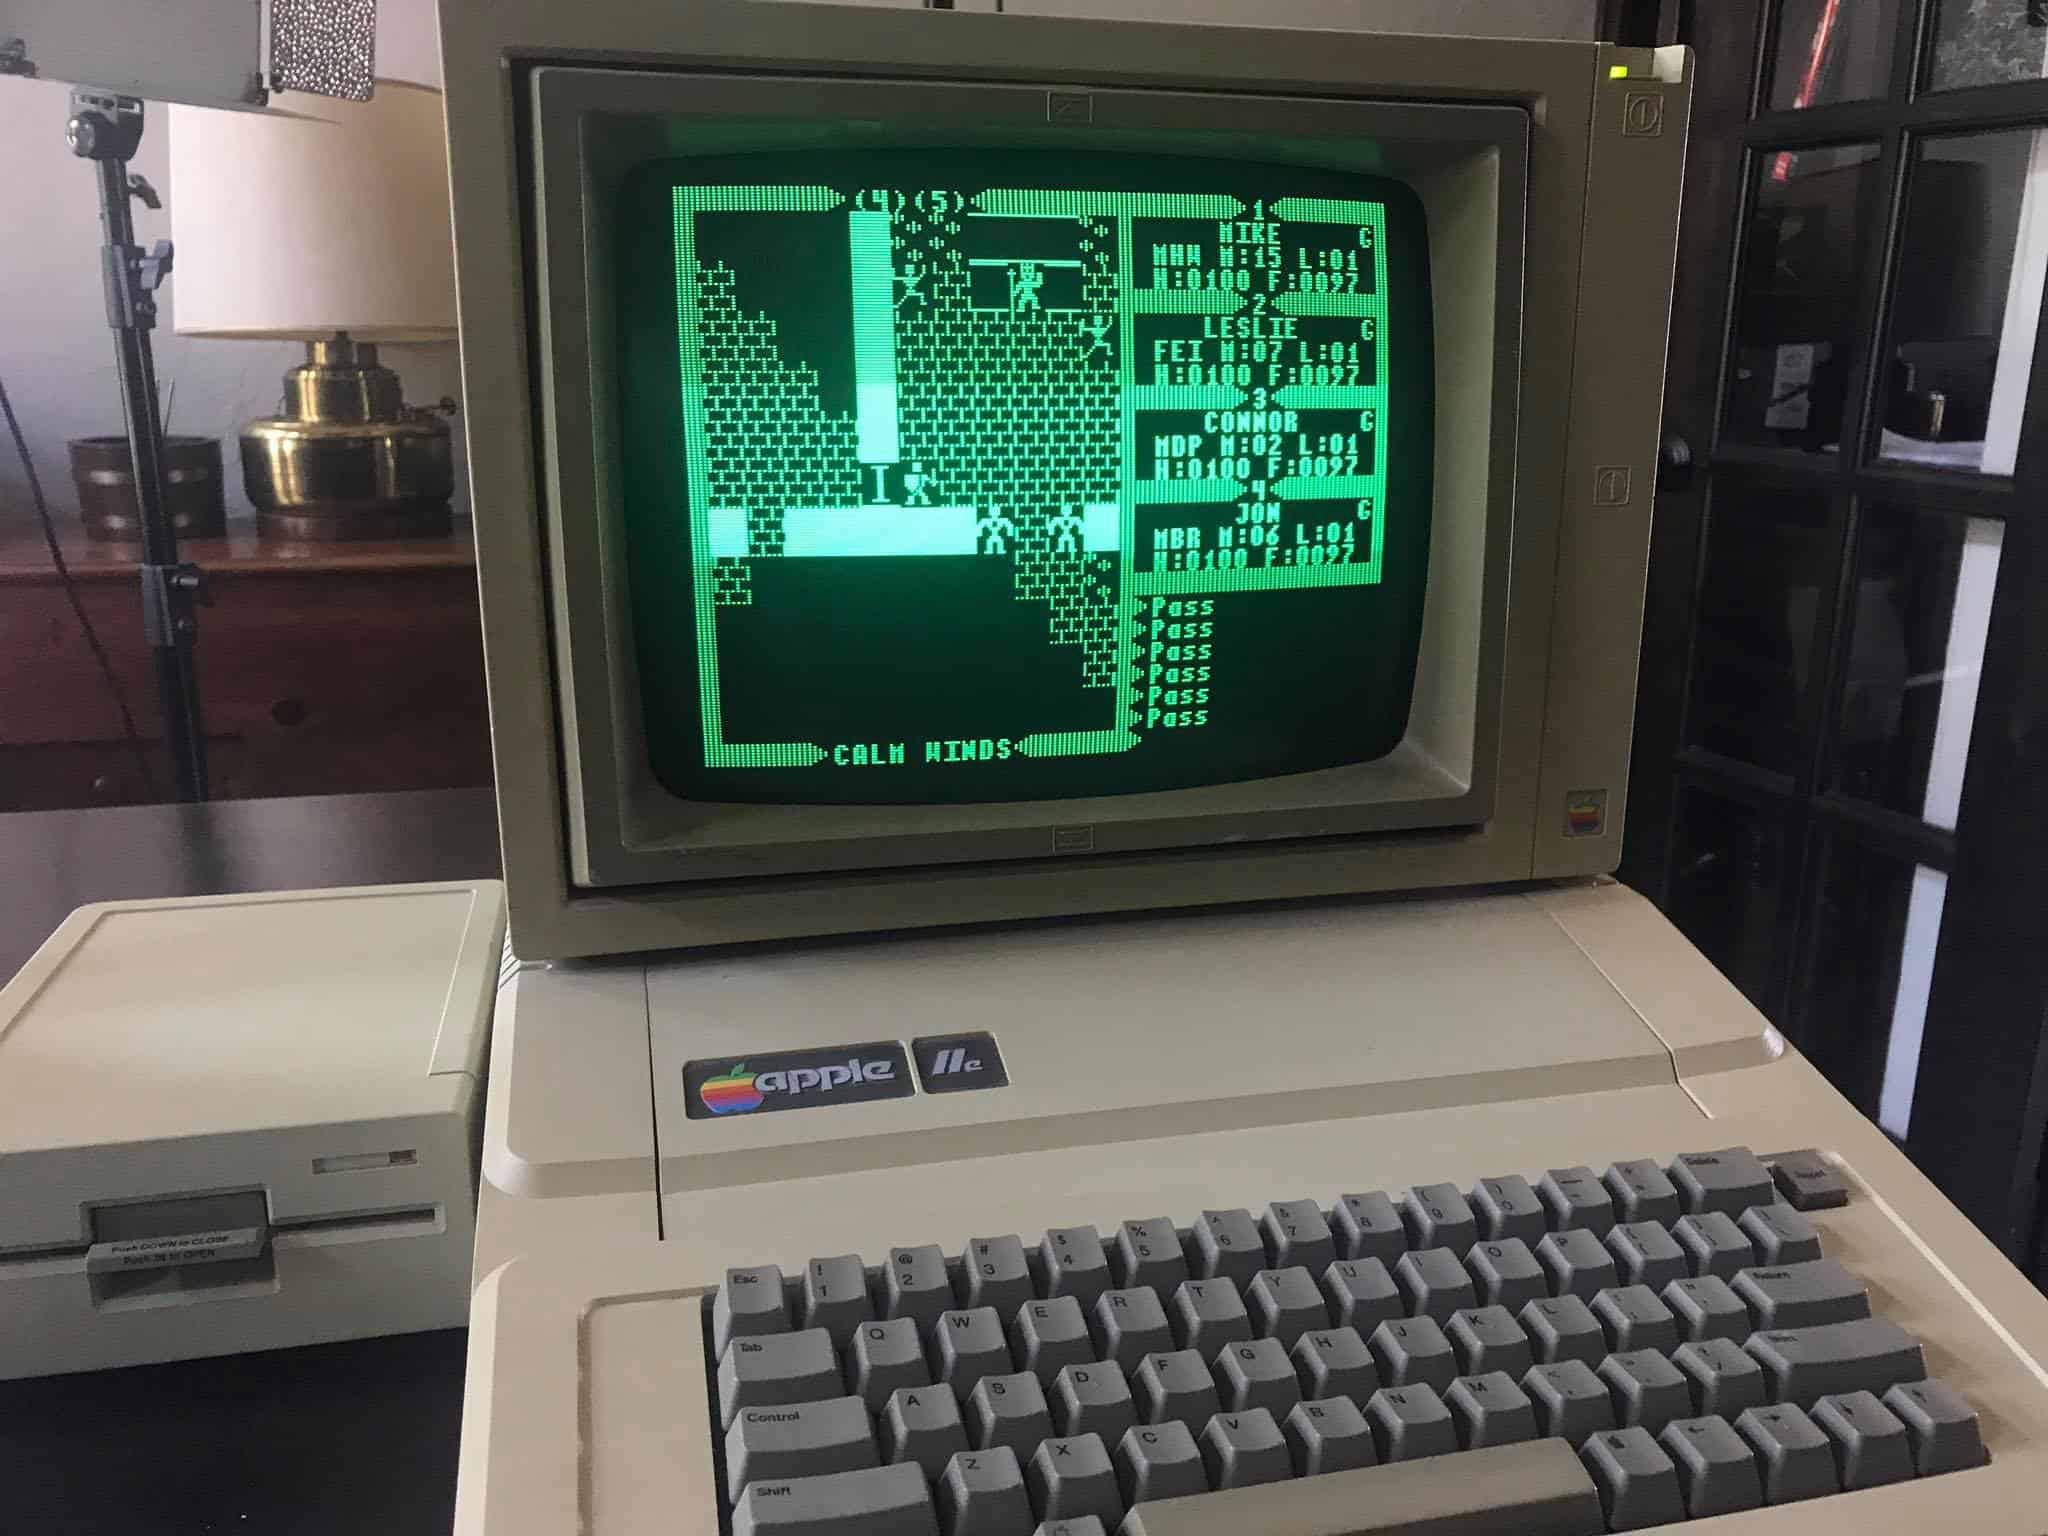 How to Transfer Files to your Apple II, II+, or IIe